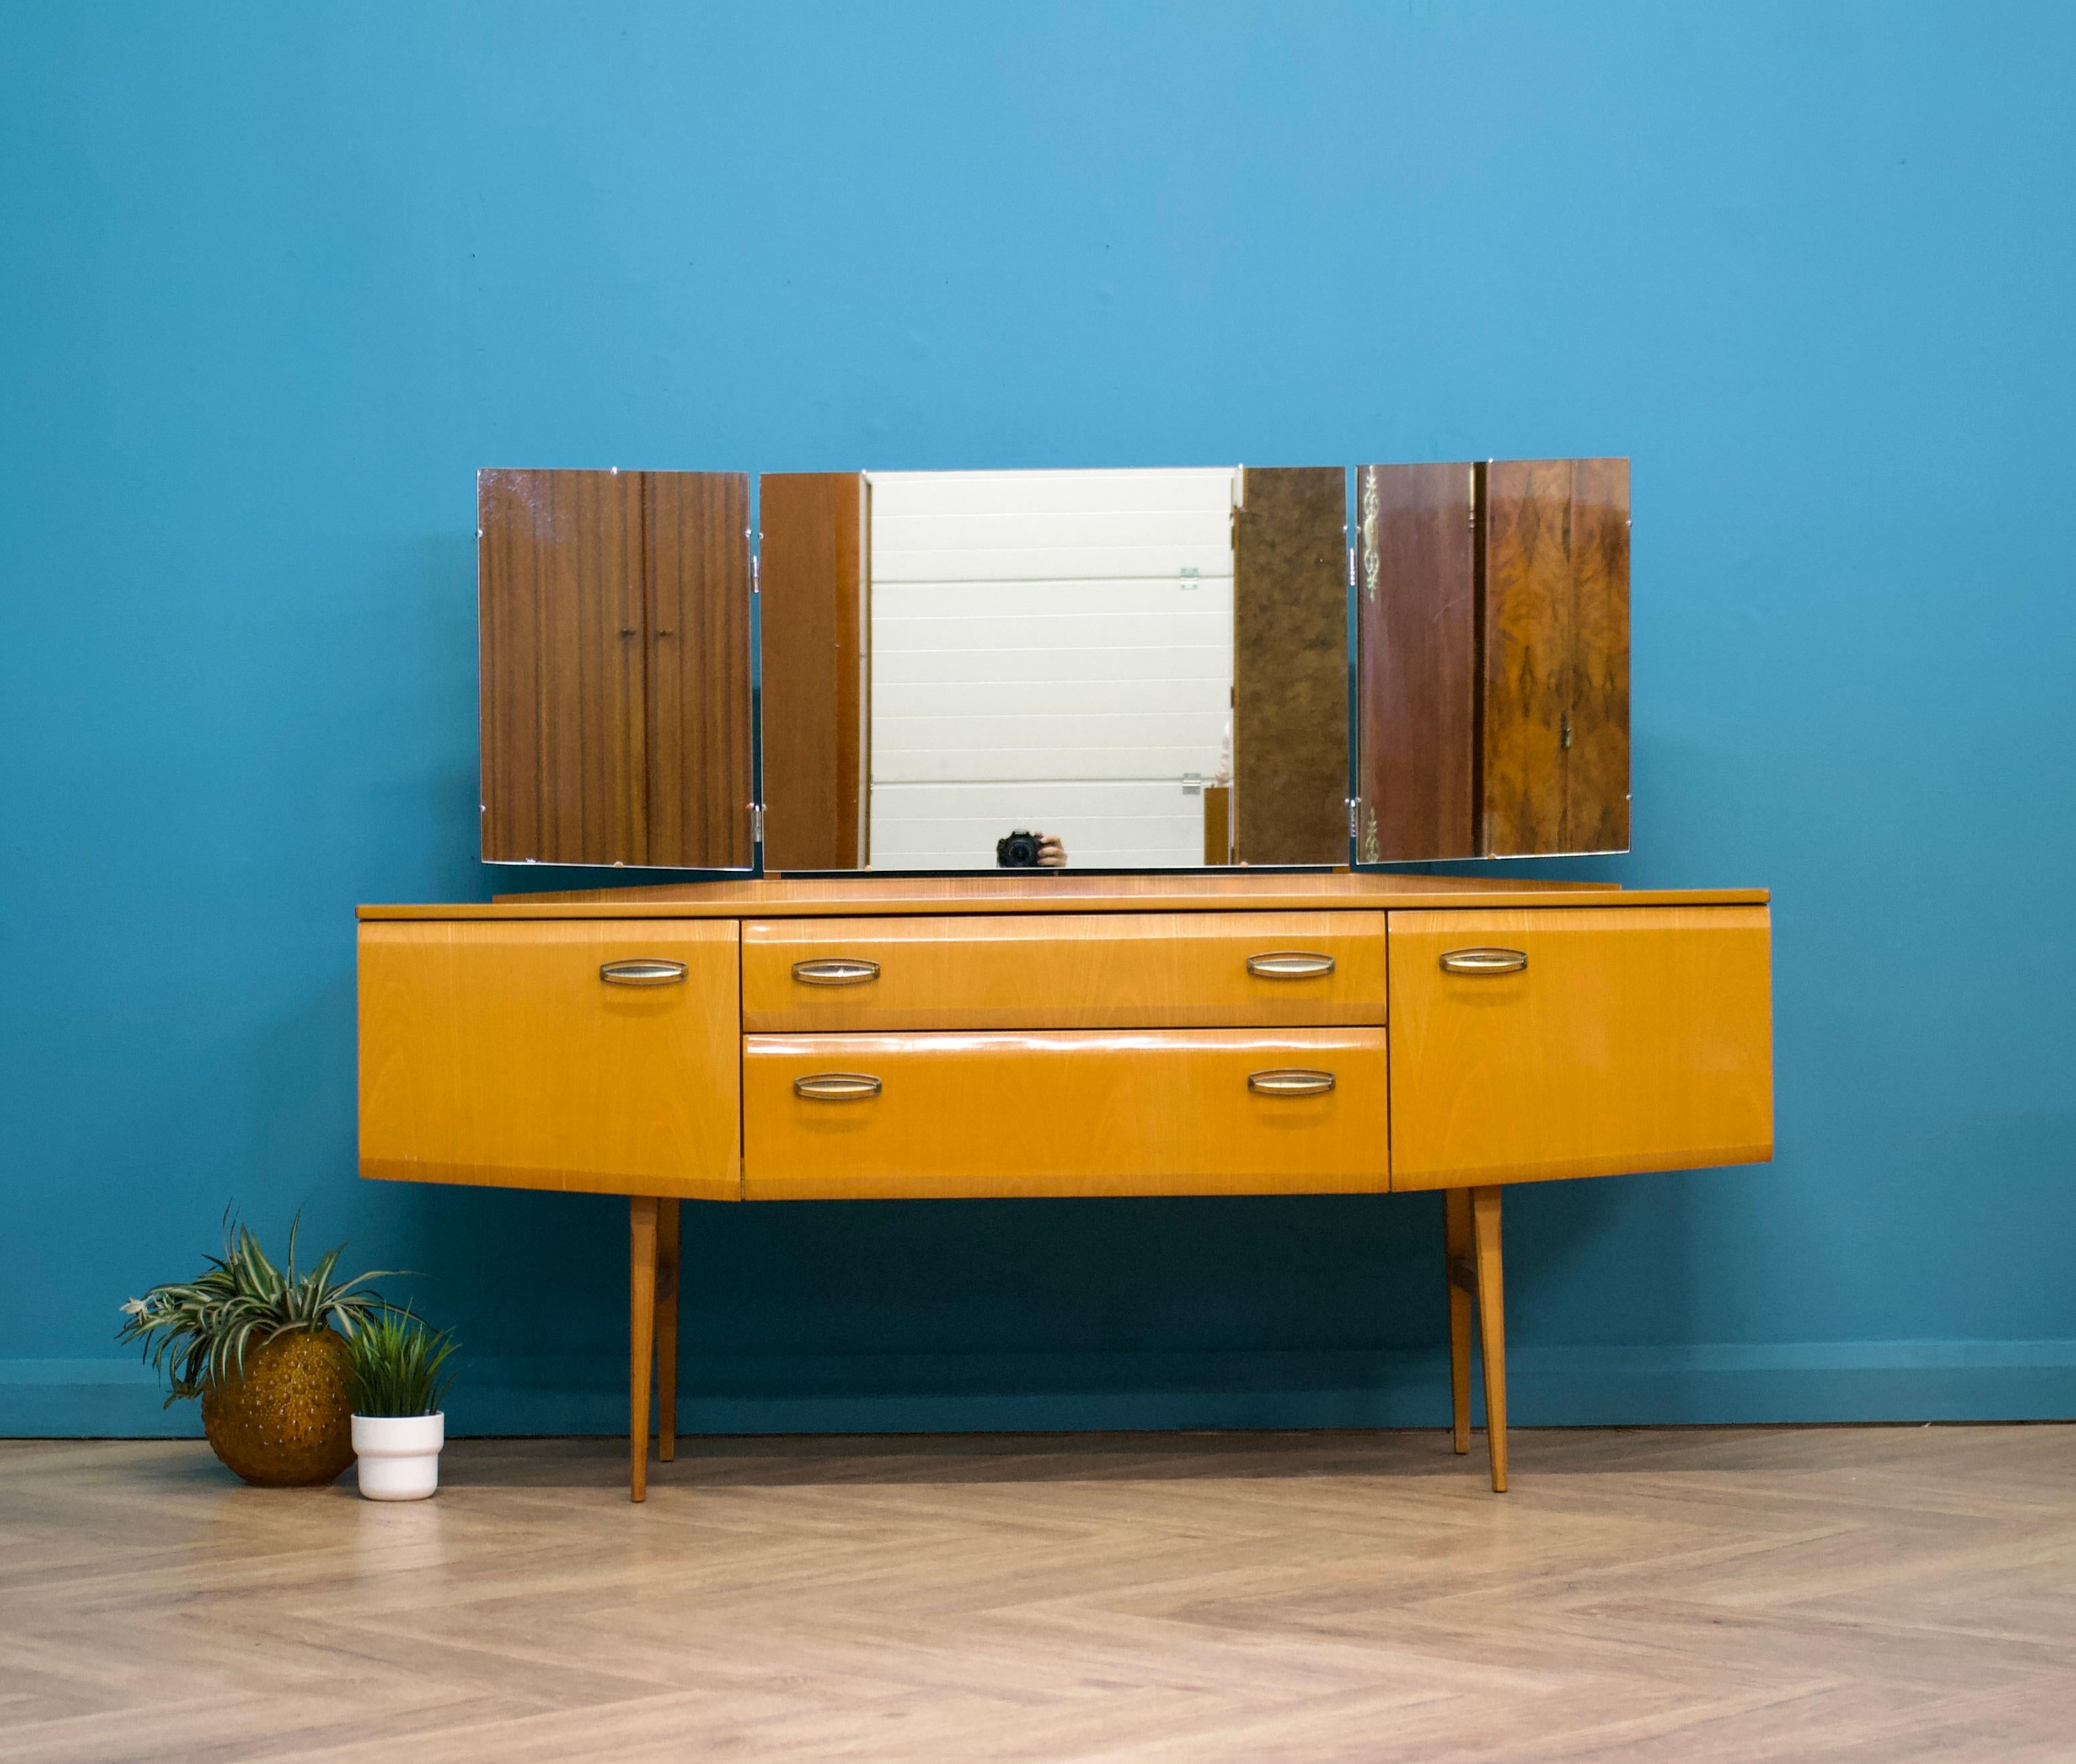 British Midcentury, Maple Sideboard or Chest of Drawers by Meredew, 1960s For Sale